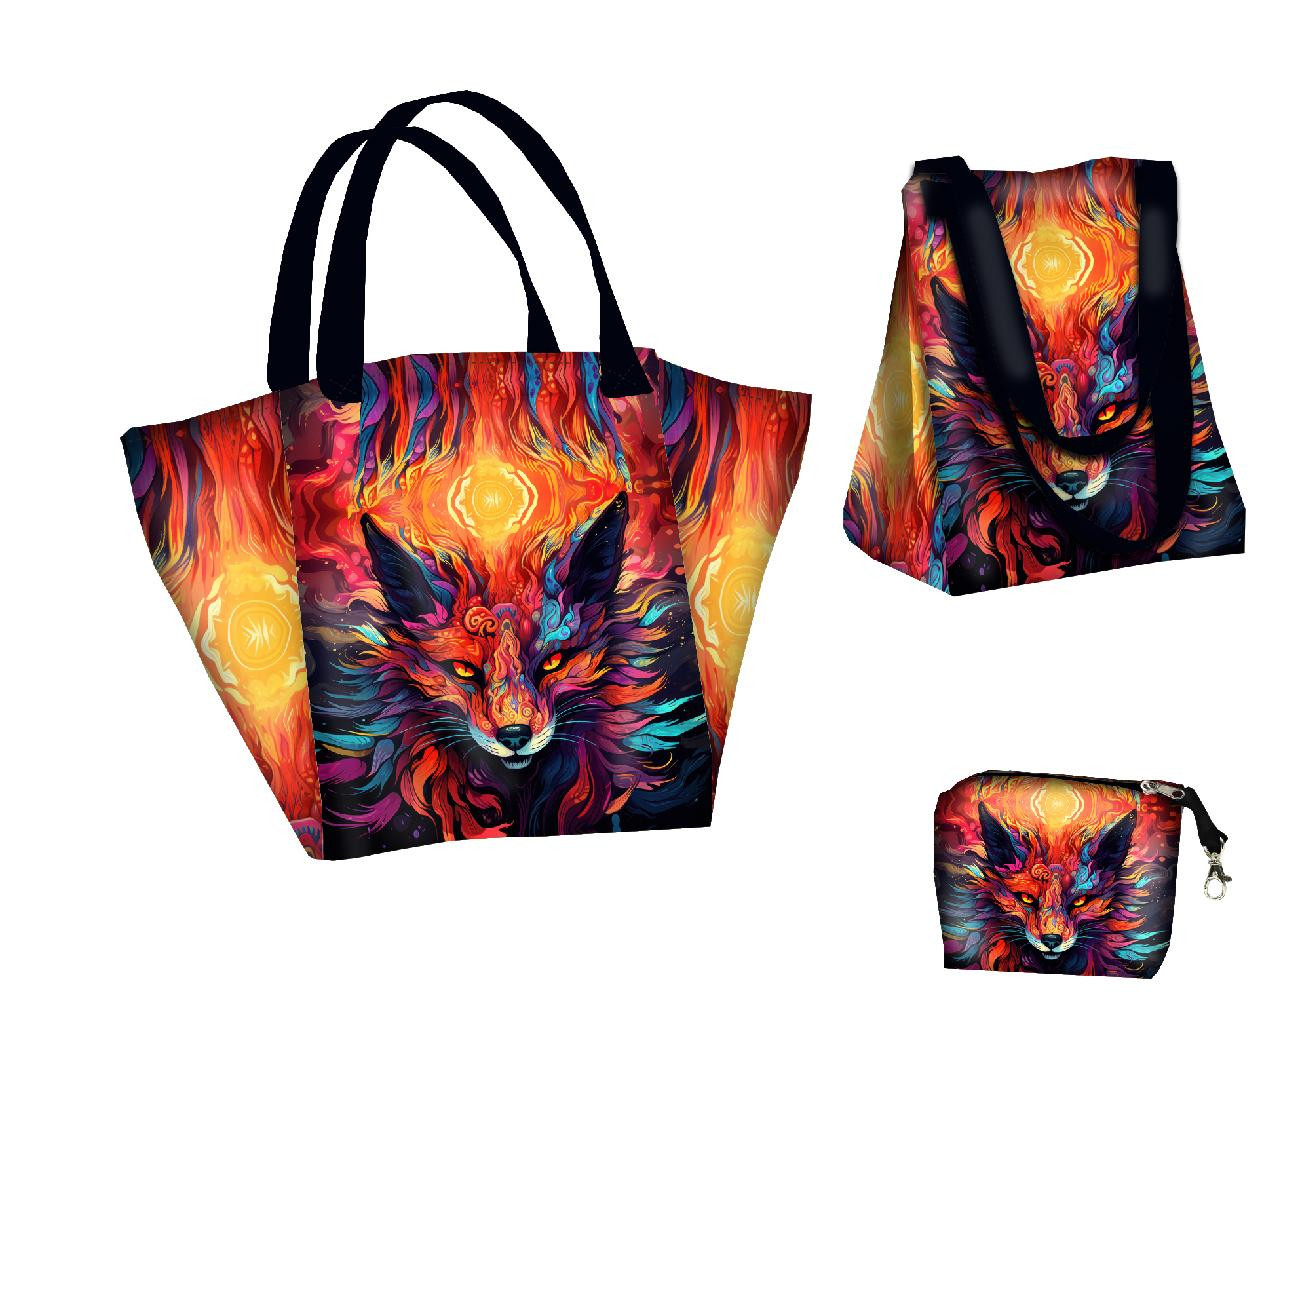 XL bag with in-bag pouch 2 in 1 - COLORFUL FOX - sewing set